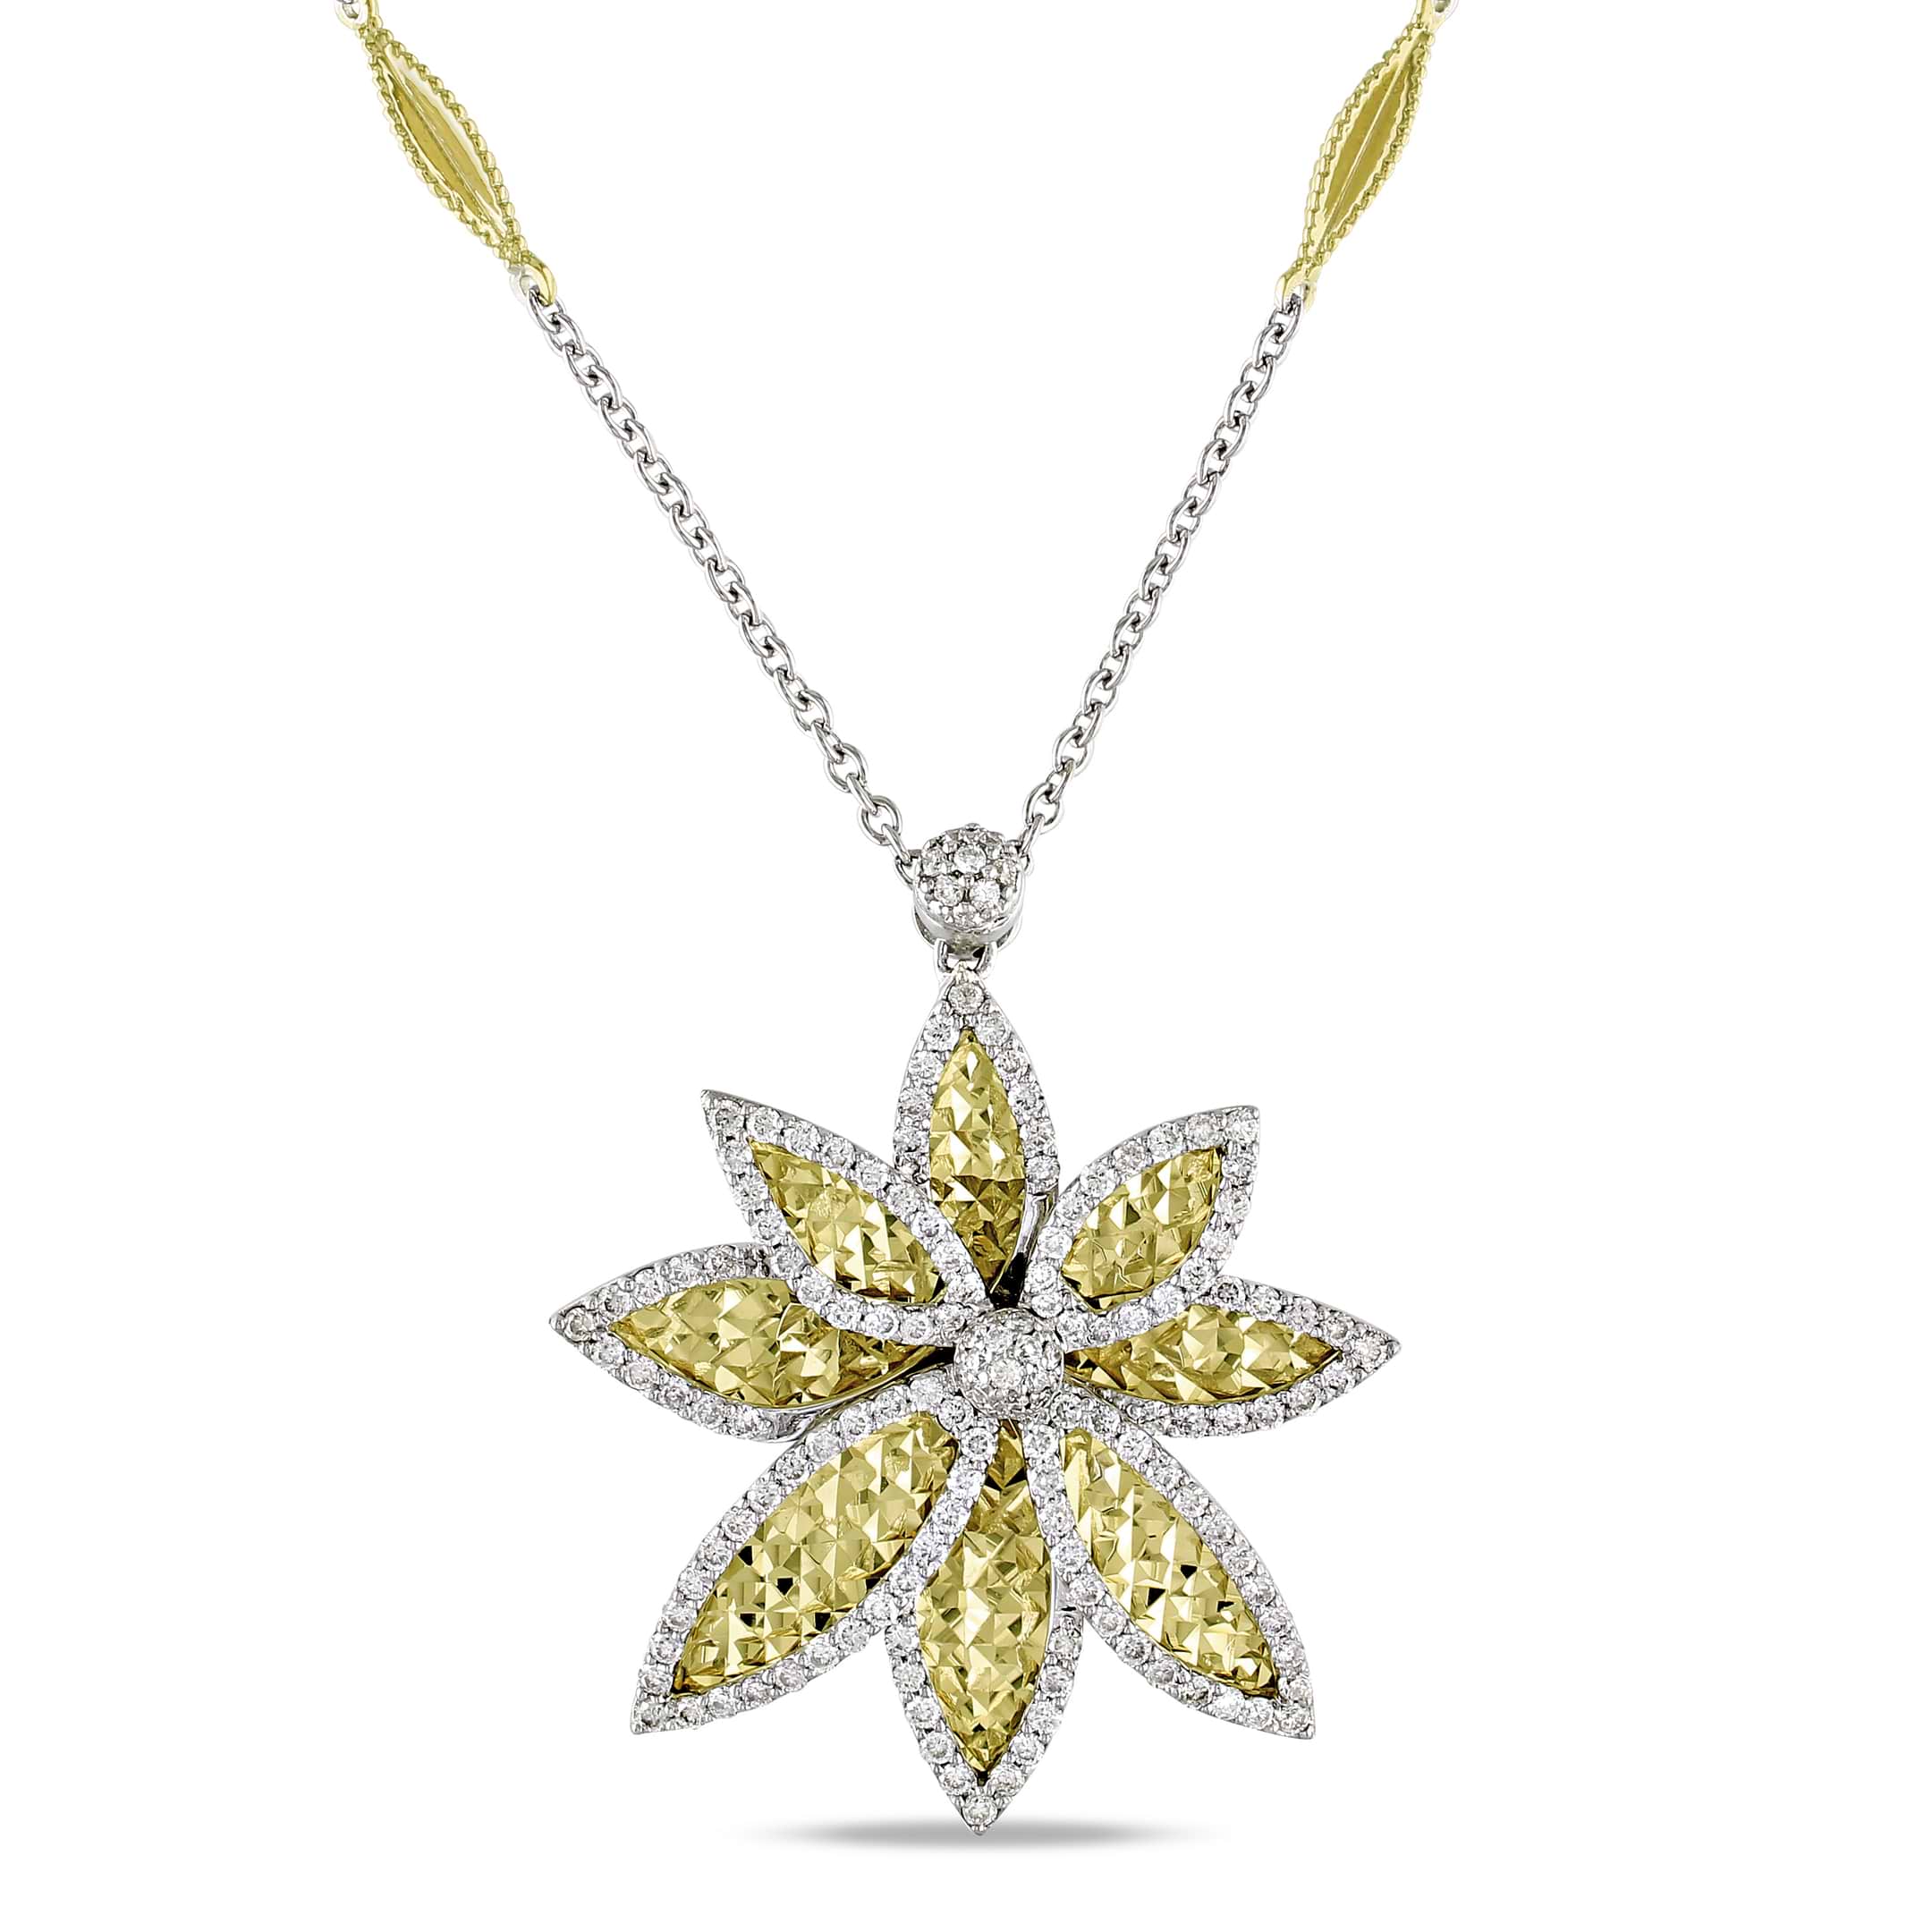 Diamond Textured Flower Pendant Necklace 18k Two Tone Gold (1.14ct)